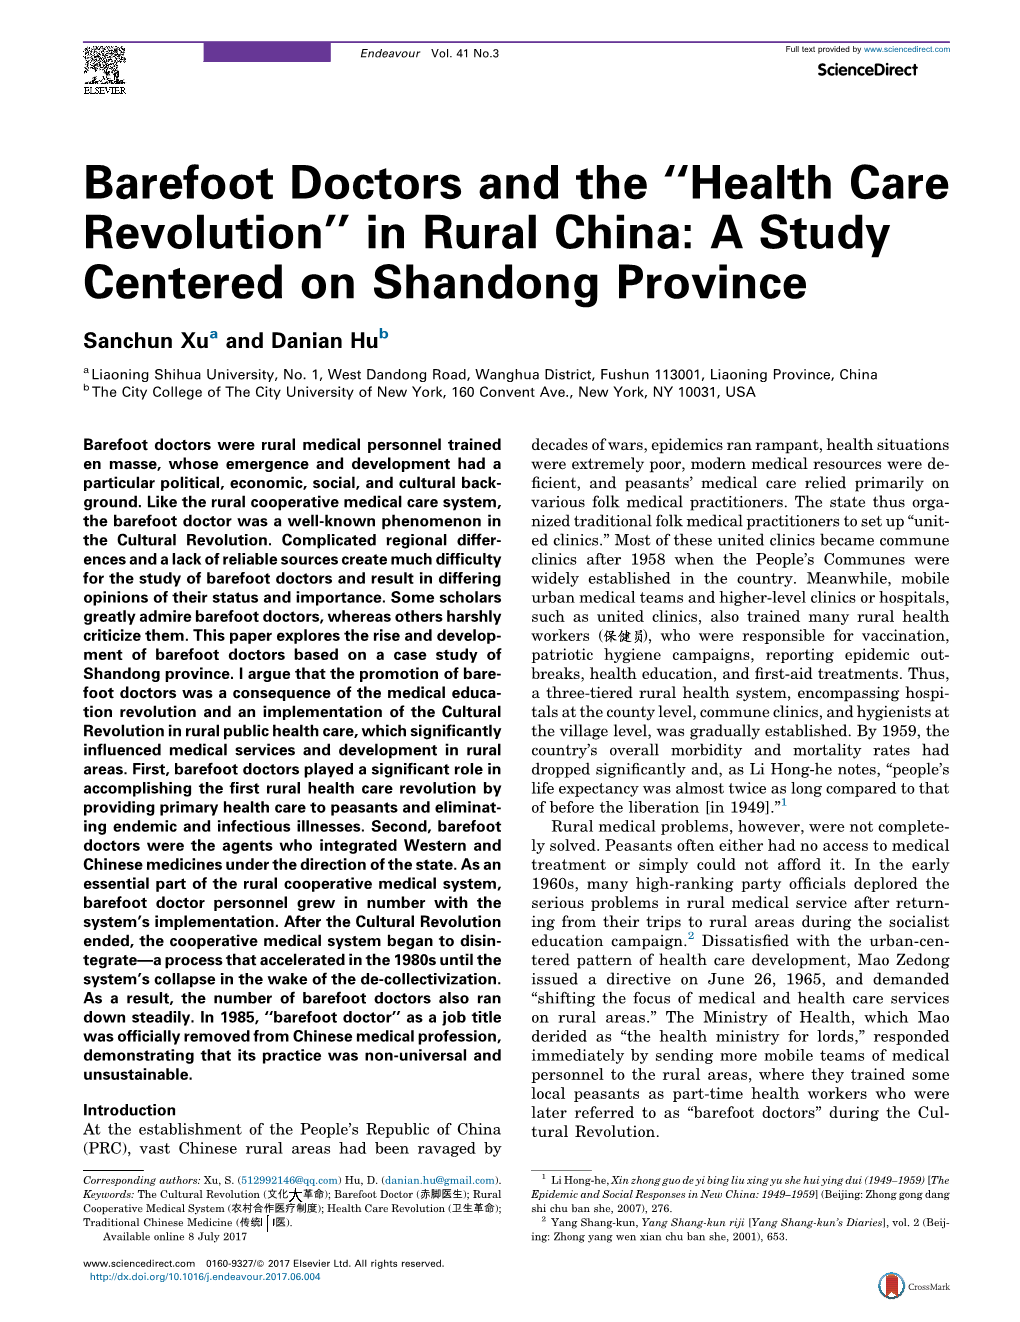 Barefoot Doctors and the ￢ﾀﾜhealth Care Revolution￢ﾀﾝ in Rural China